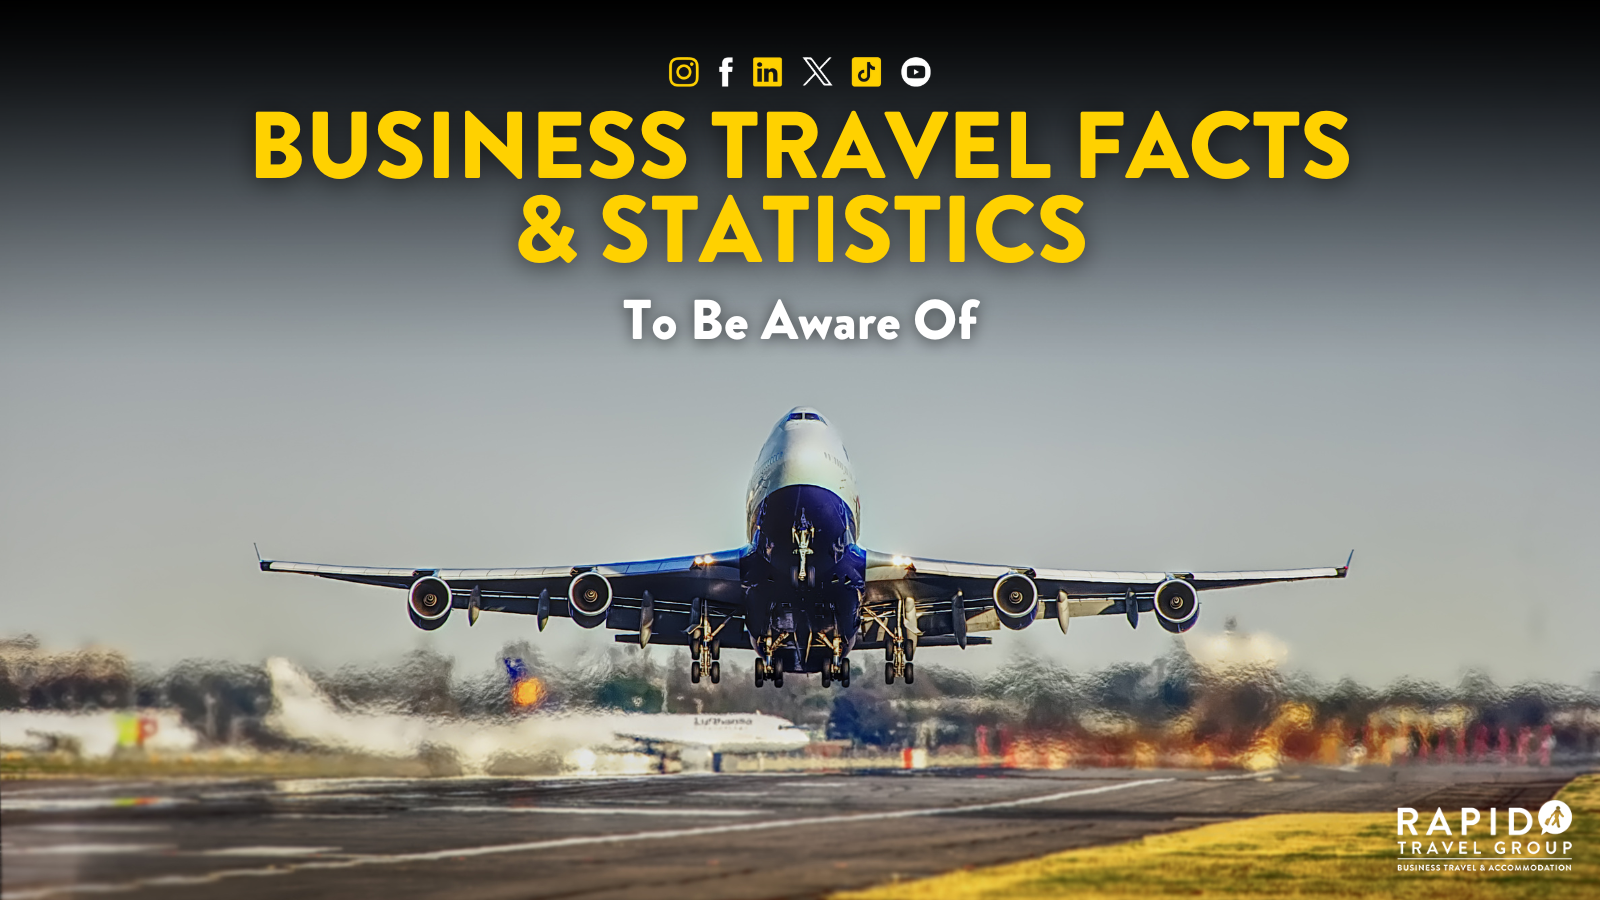 Business Travel Facts & Statistics To Be Aware Of